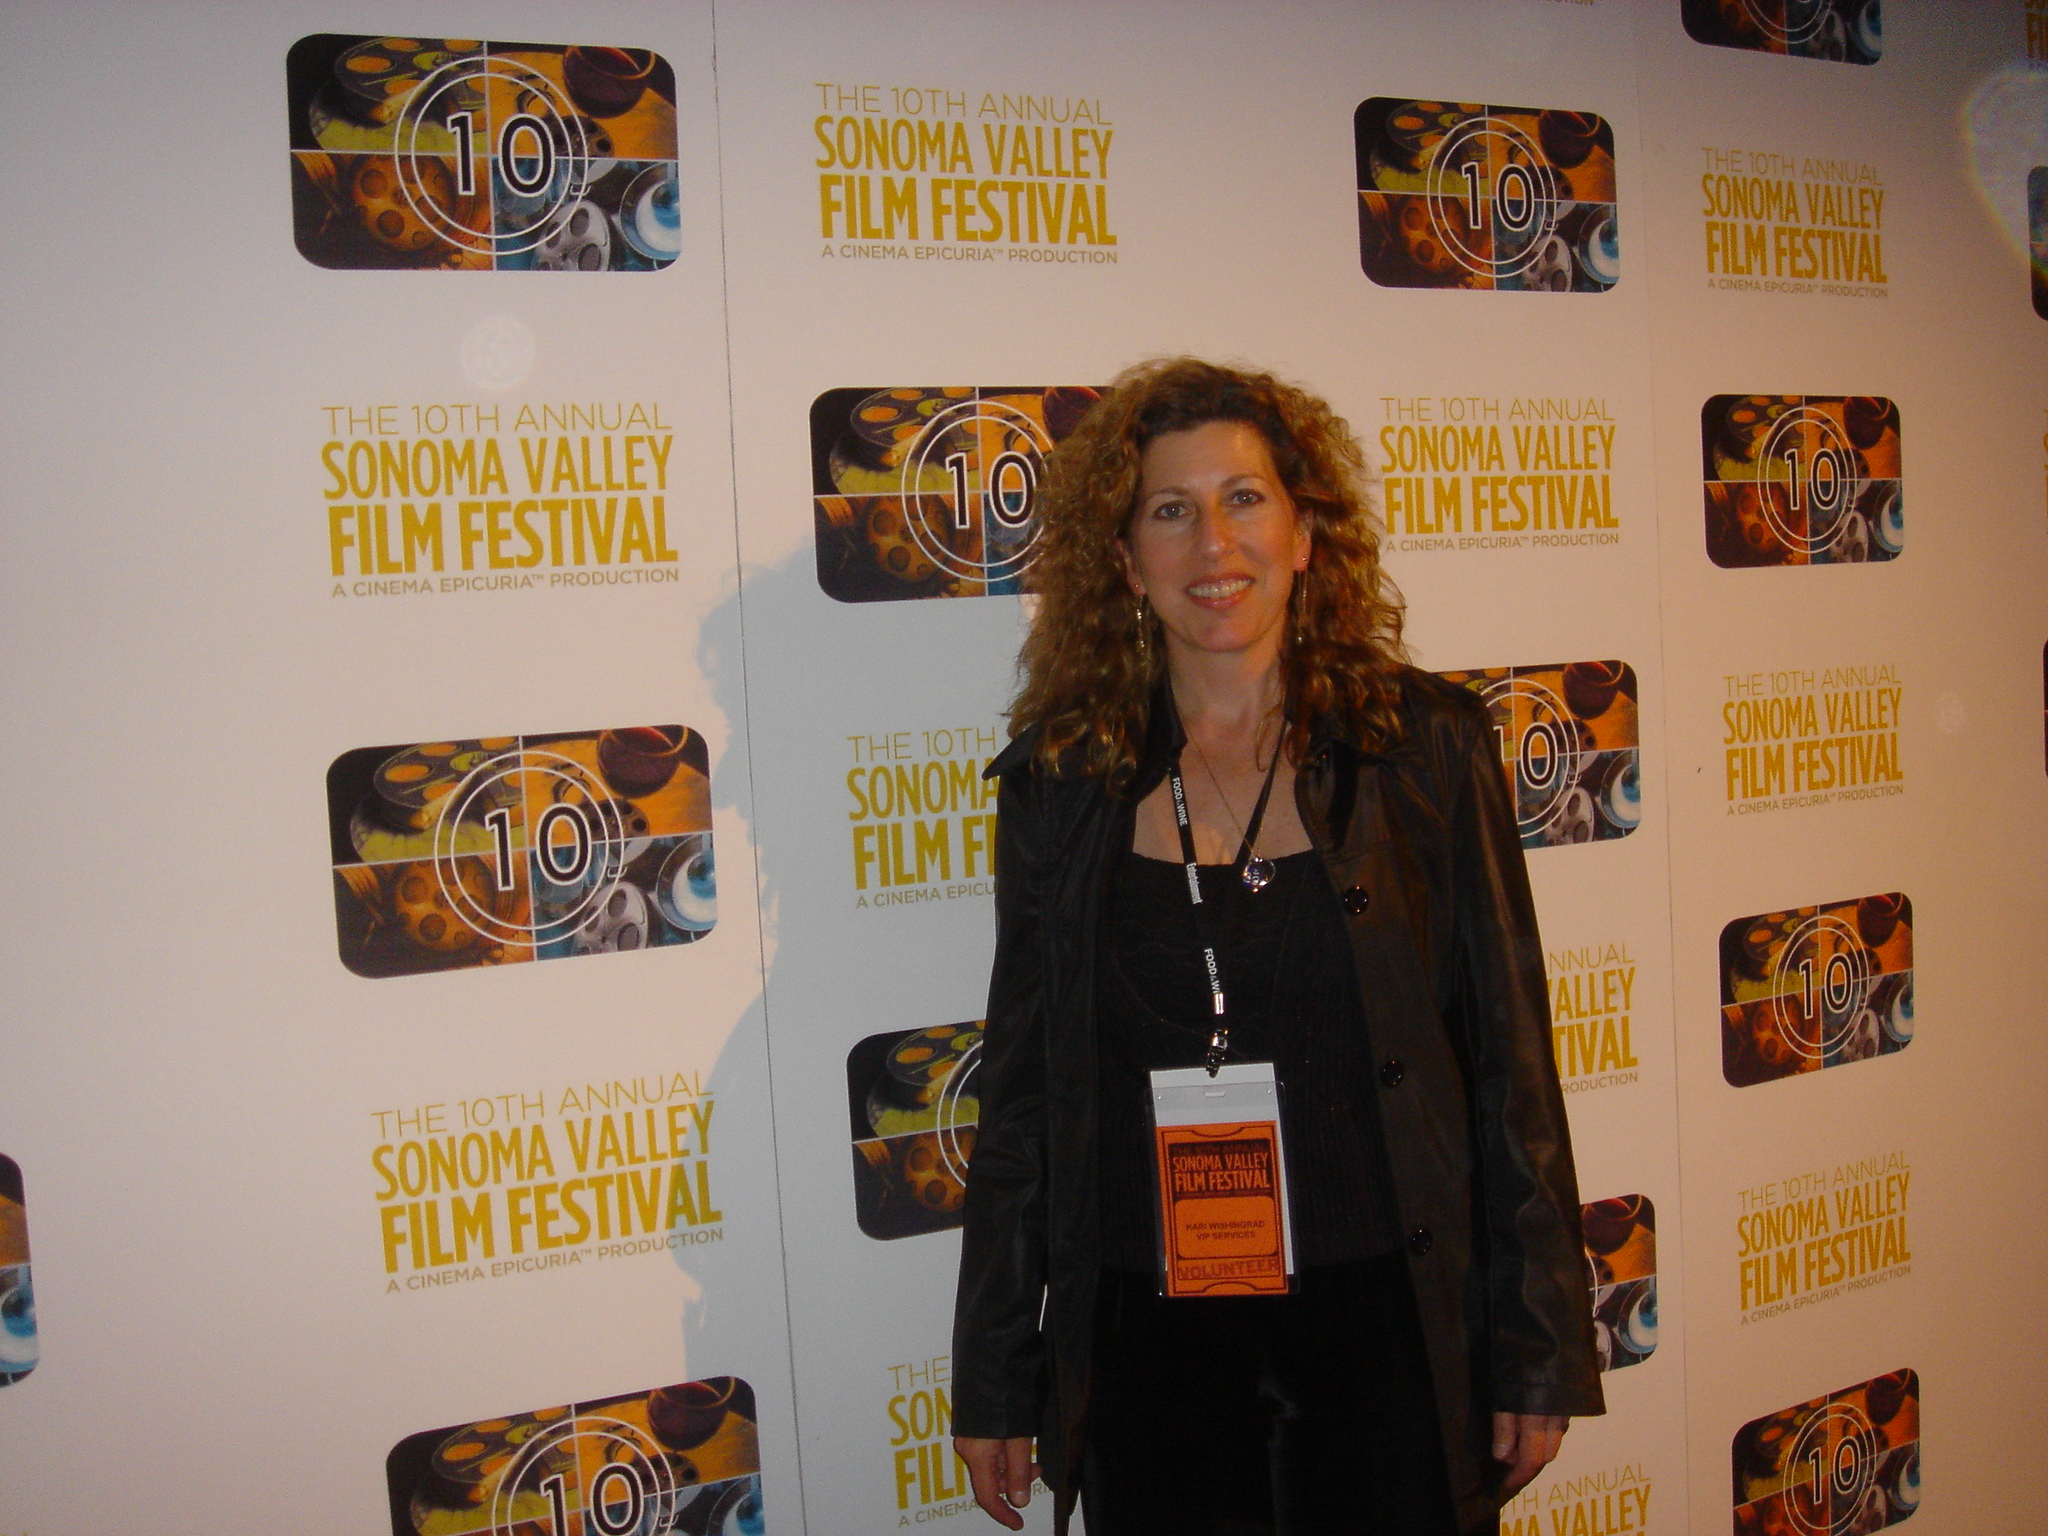 at the Sonoma Valley Film Festival